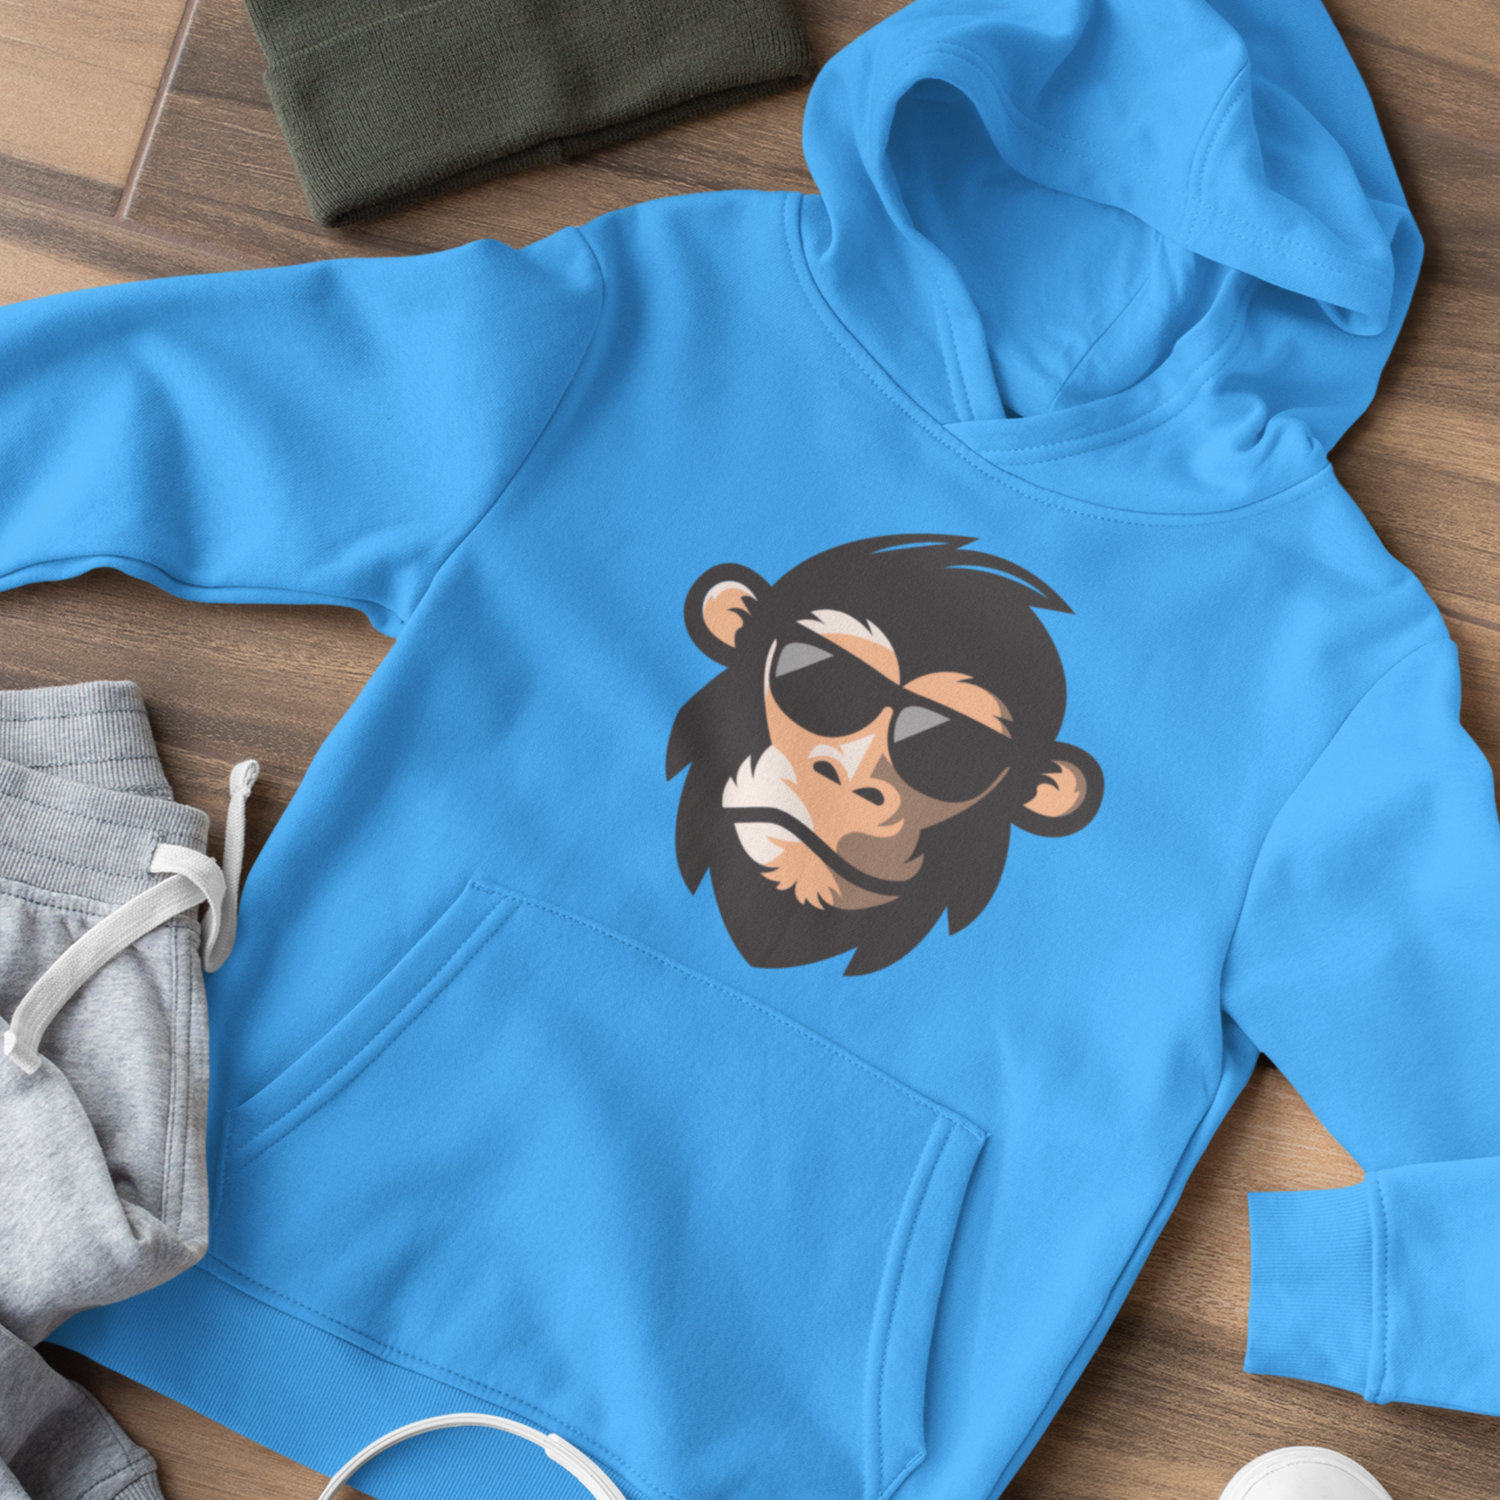 A cool chimp wearing sun glasses on a bright blue child's hooded sweatshirt